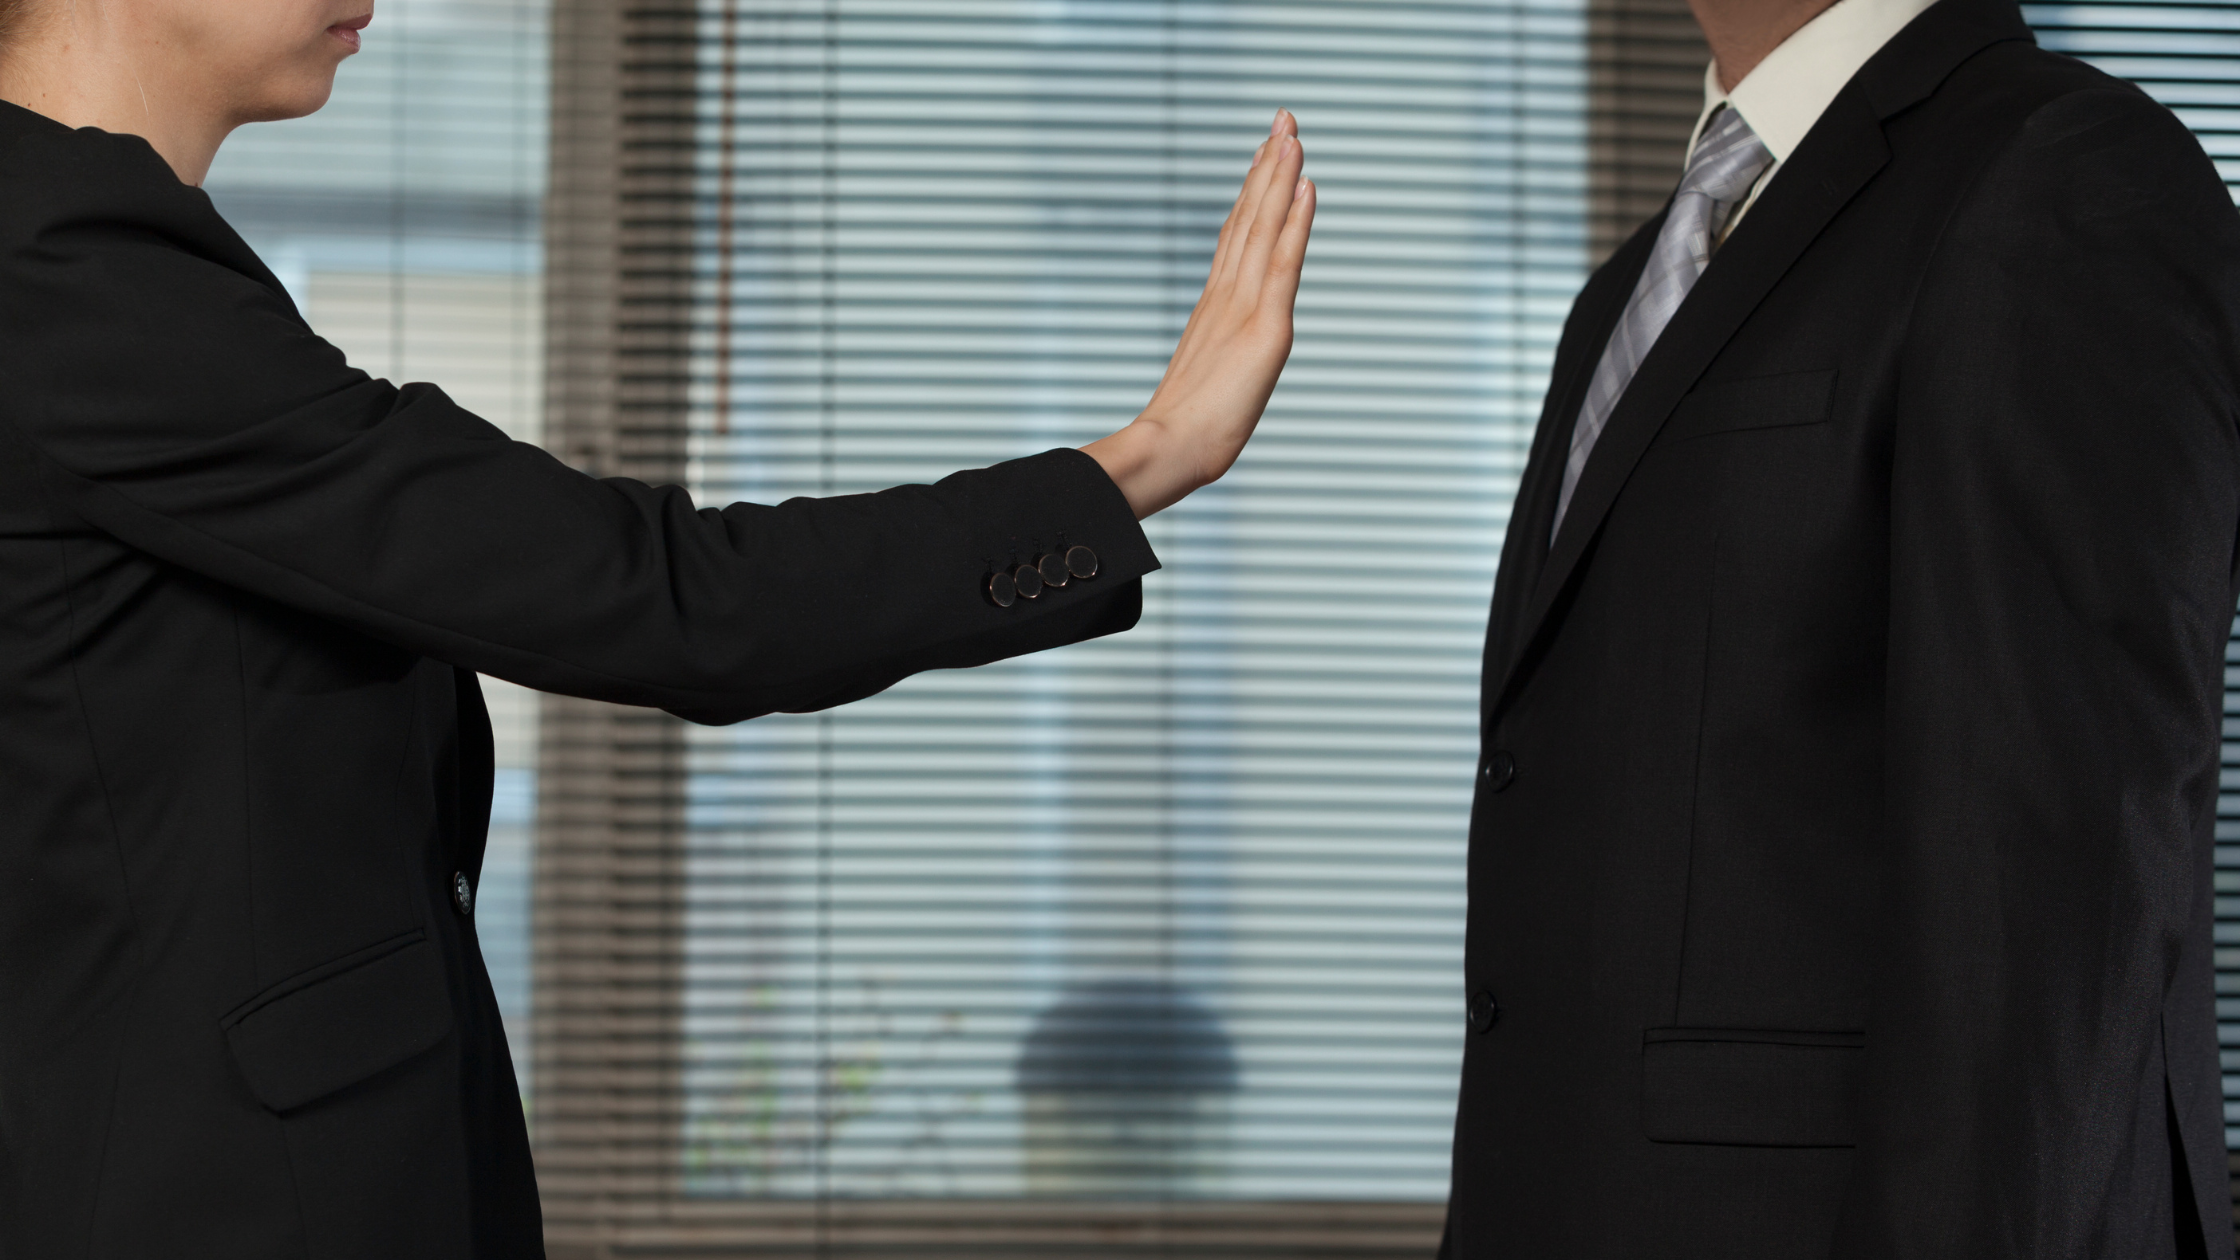 A paralegal remains quiet as his boss yells at him to show how to cope with a yelling boss.